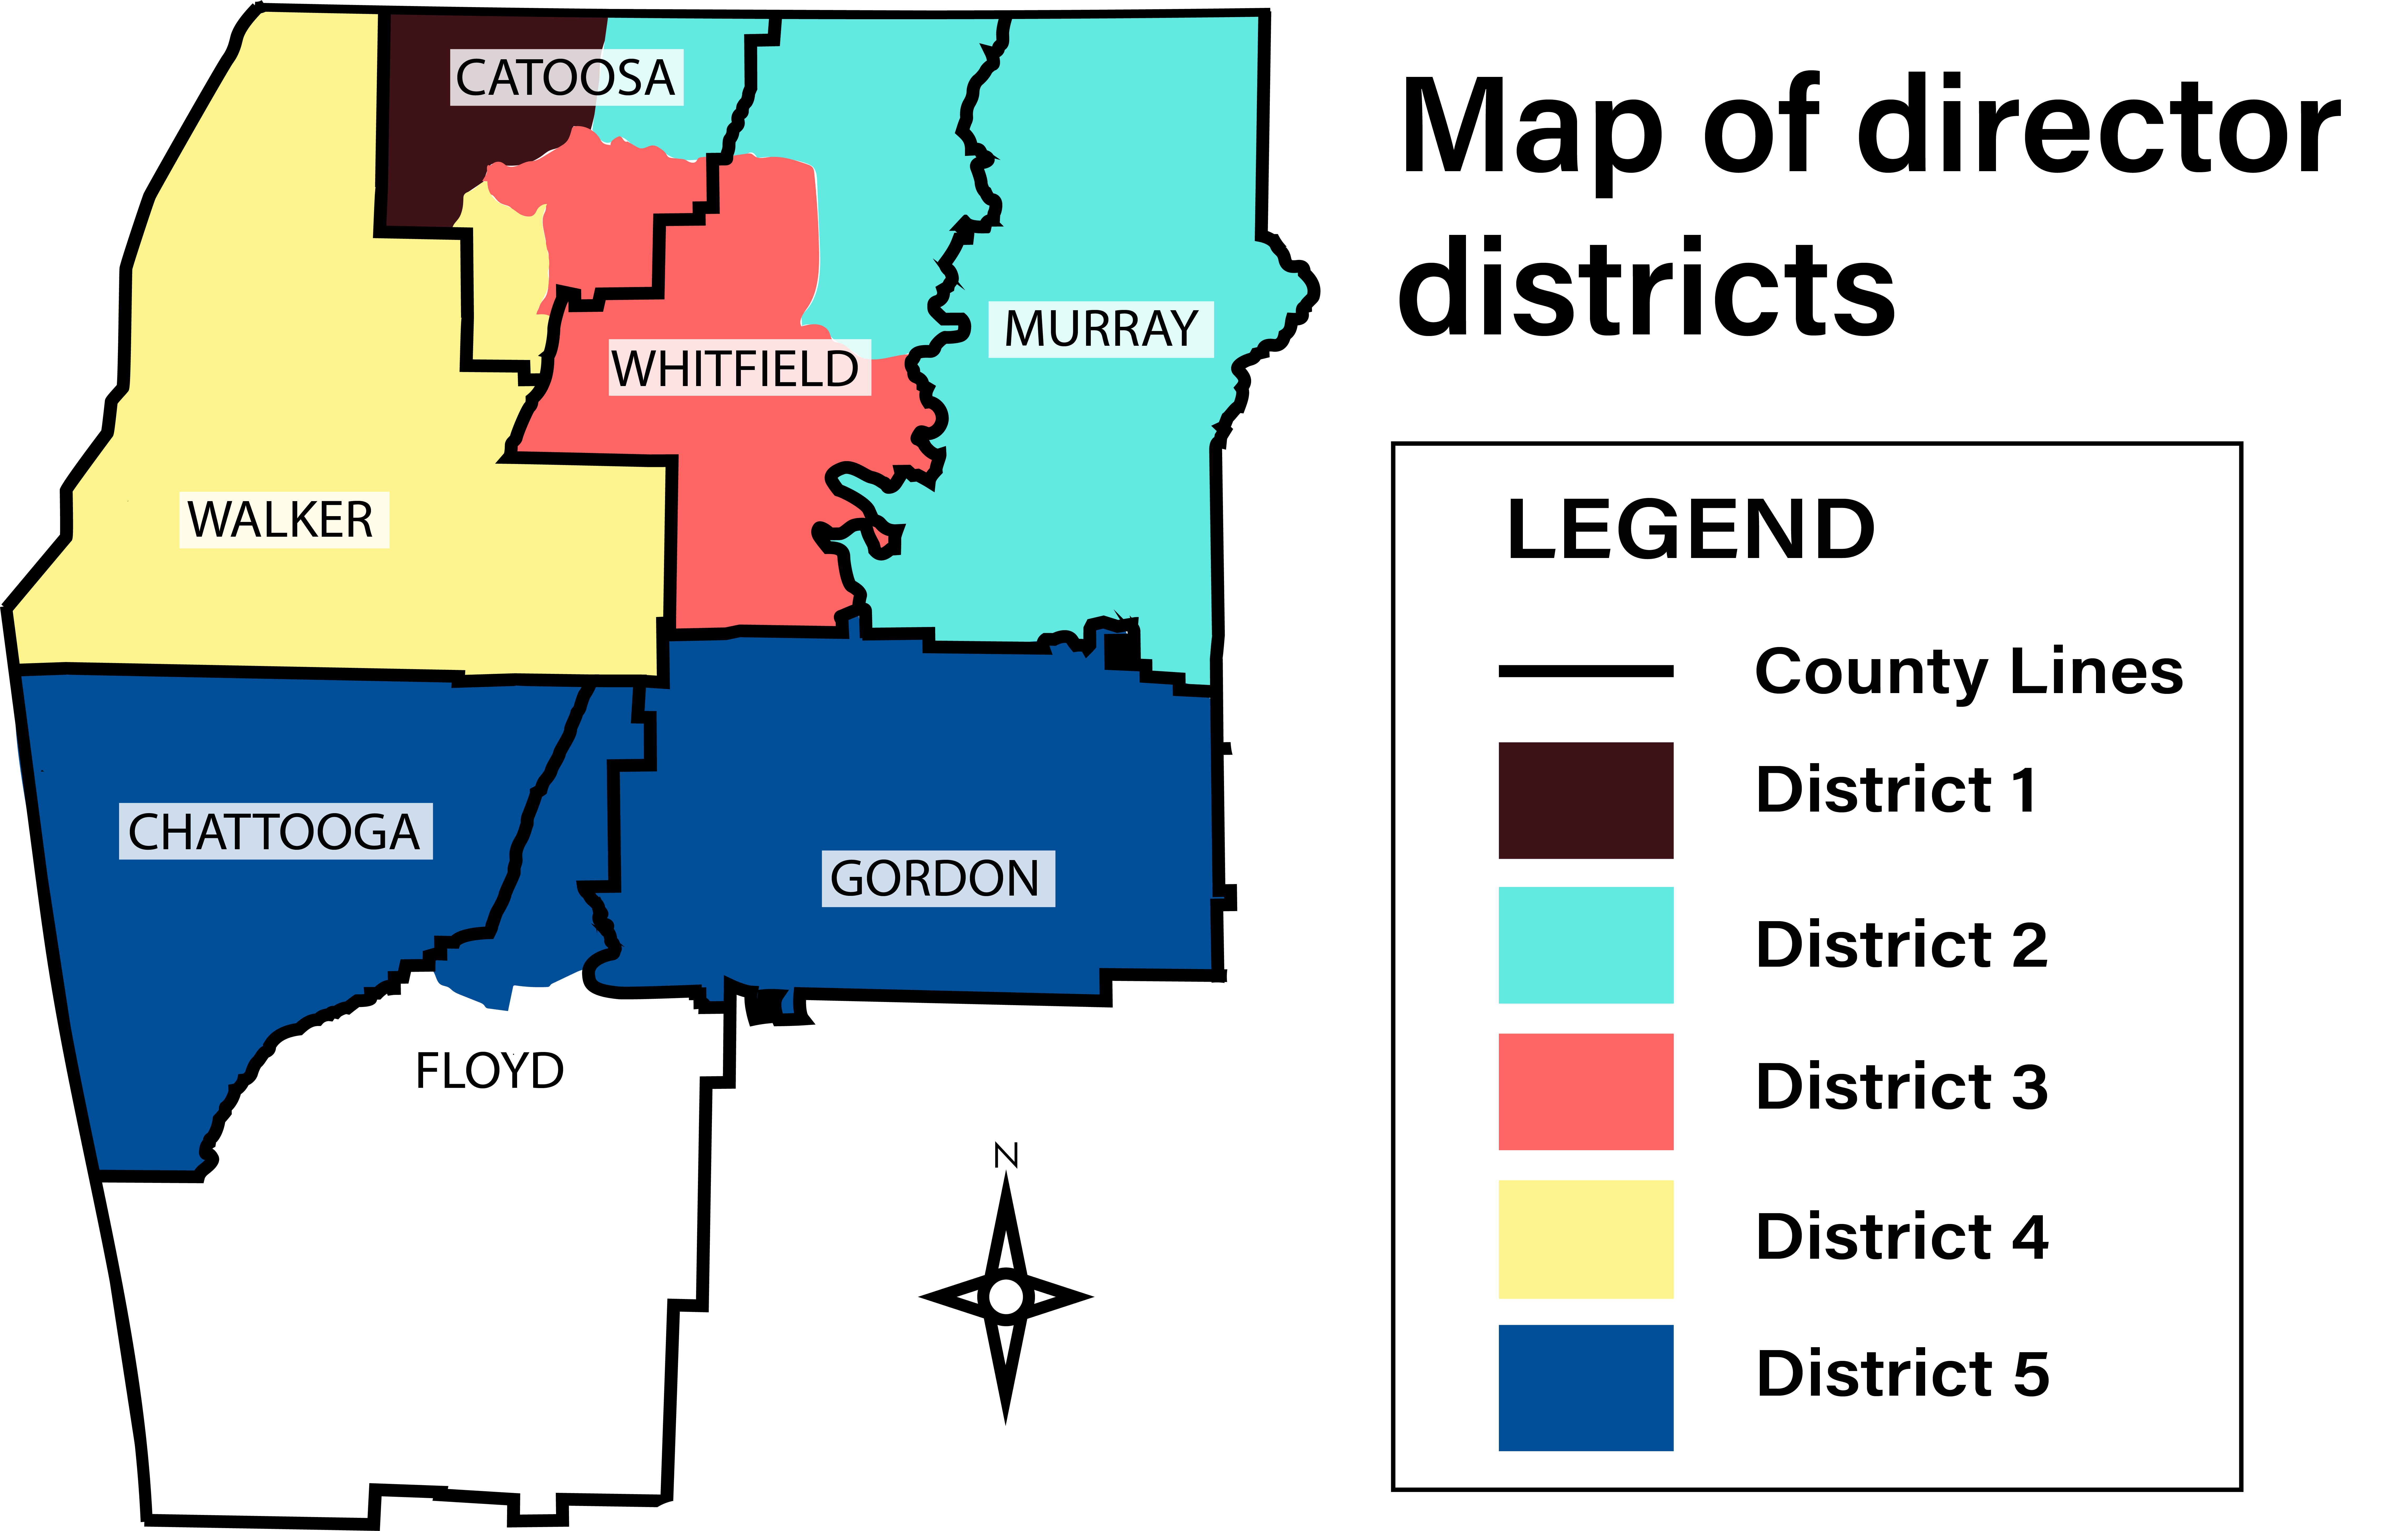 Approximate Director districts